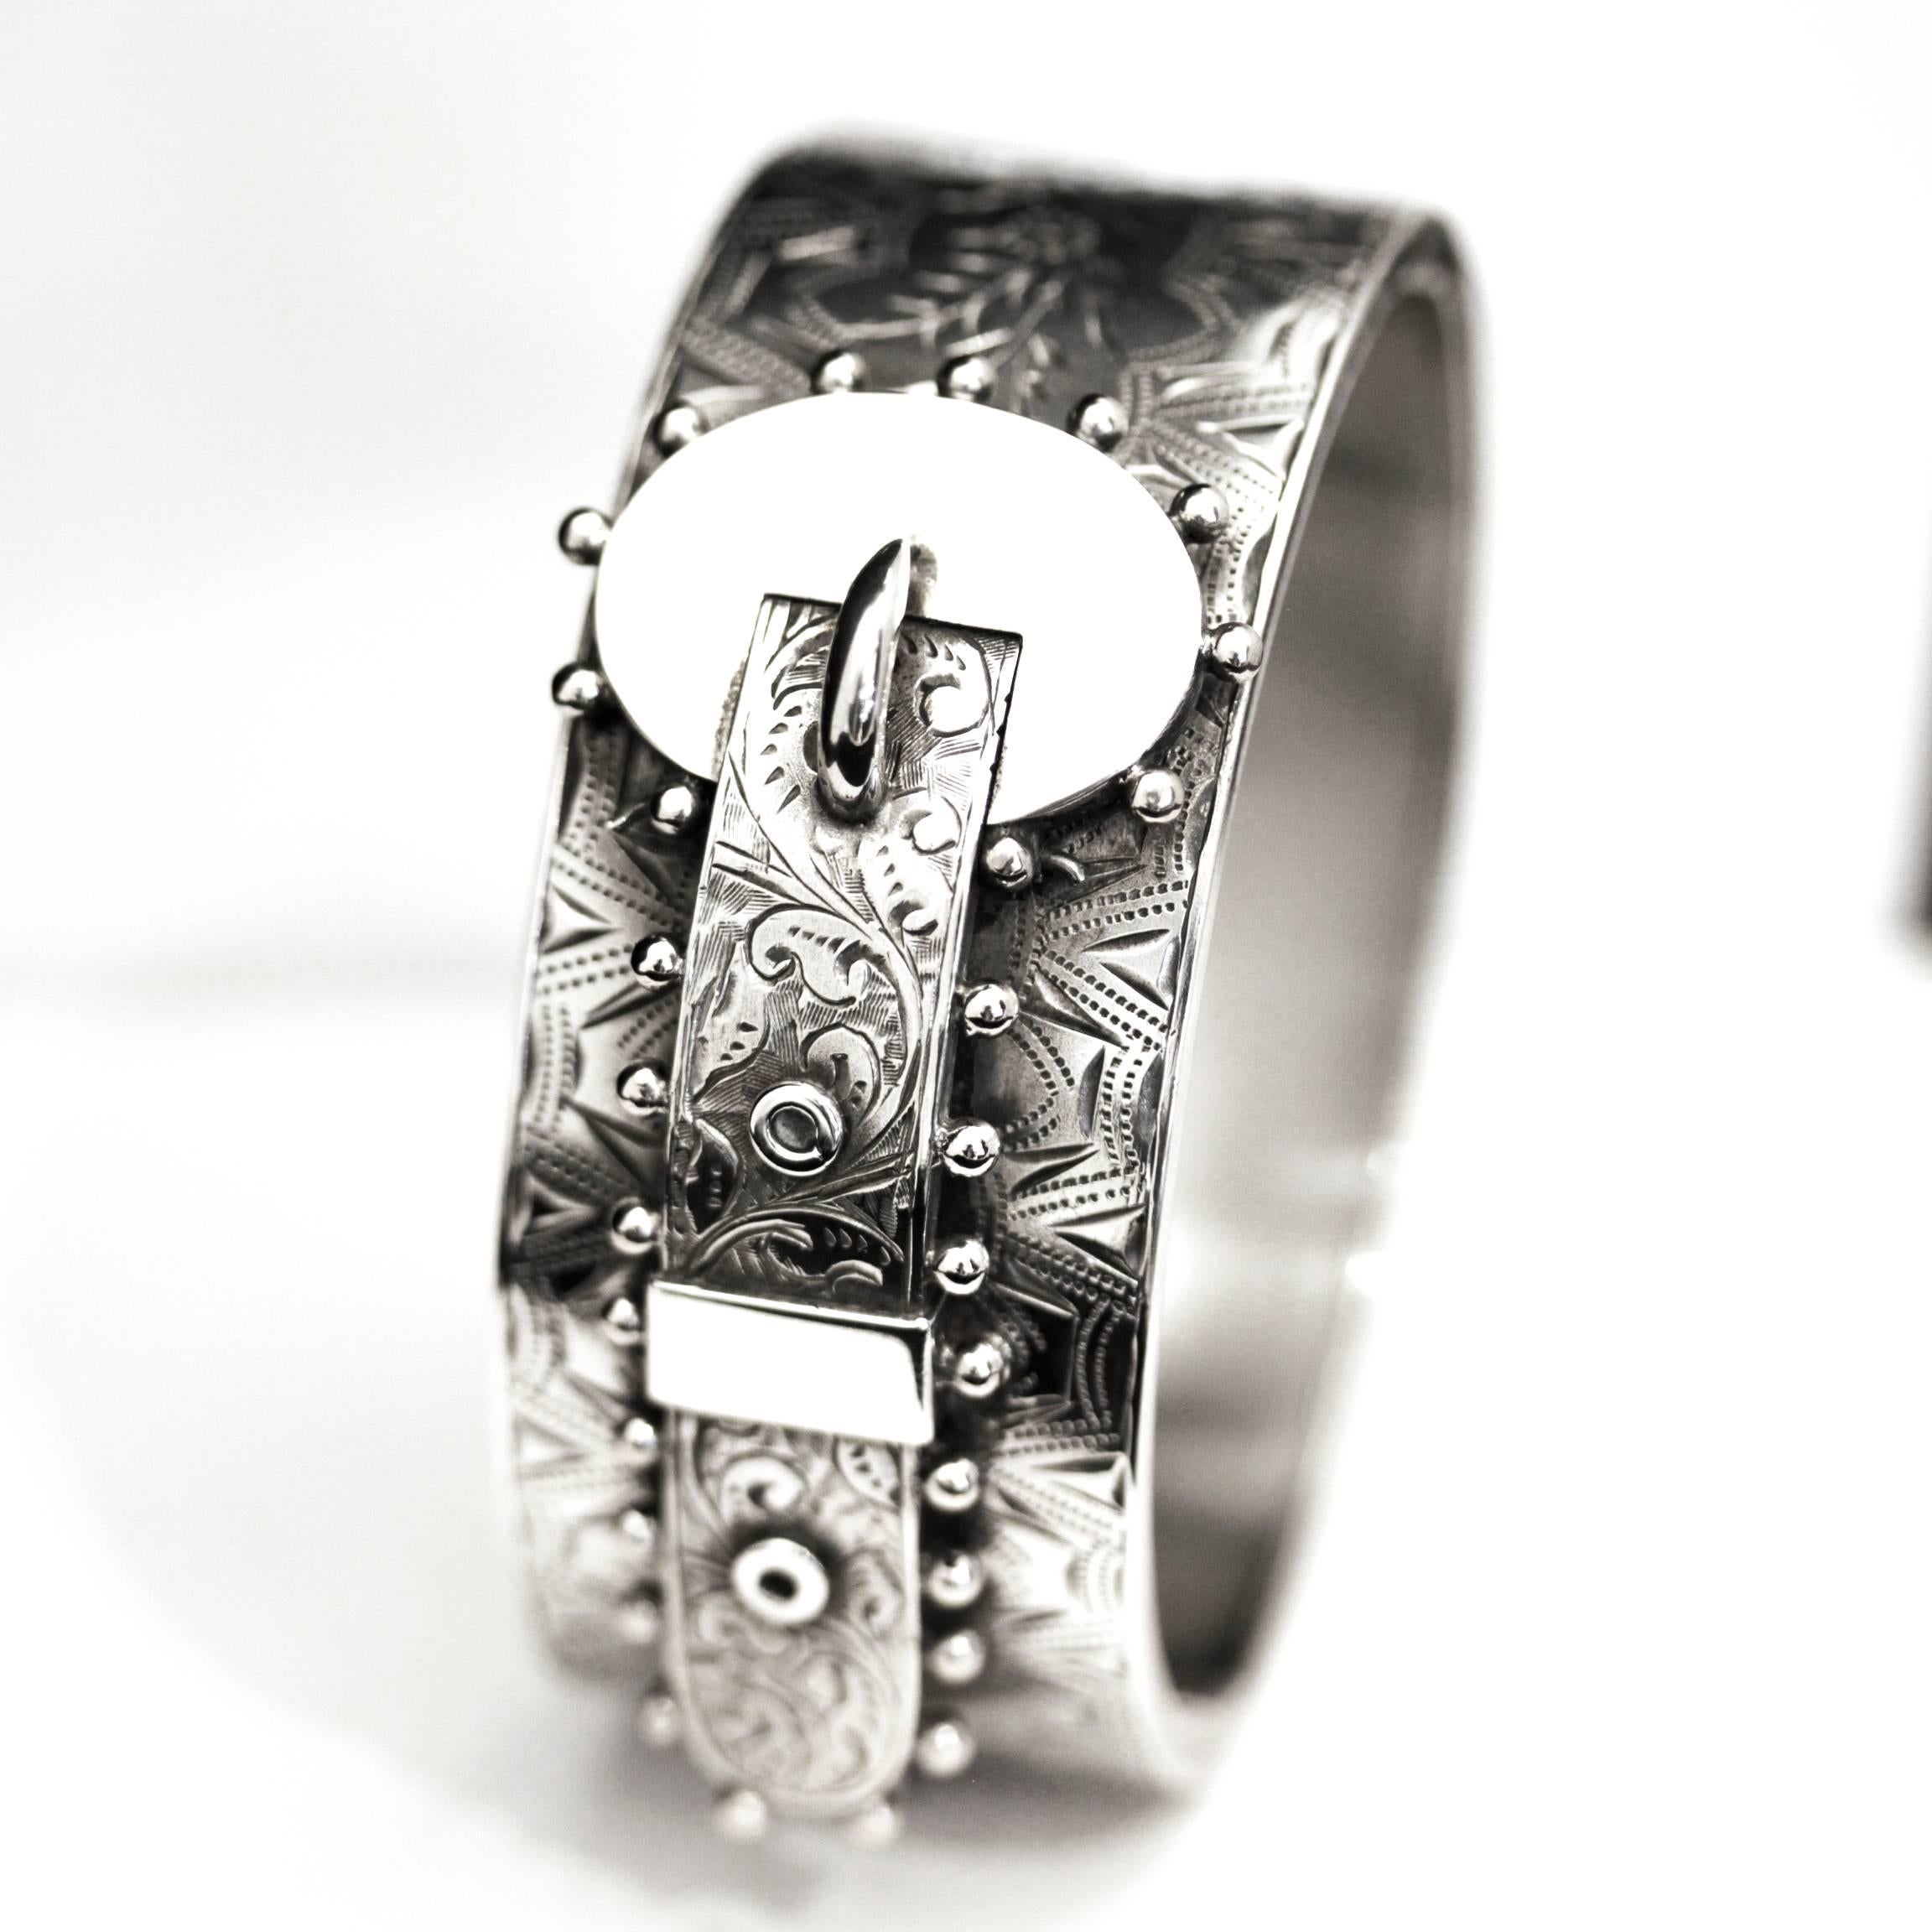 Antique Victorian Sterling Silver hinged buckle bangle, with Hallmarks

Antique silver buckle bangle has been crafted in sterling silver. The anterior face of the bangle is ornamented with an applied buckle set in relief with bright cut stylised